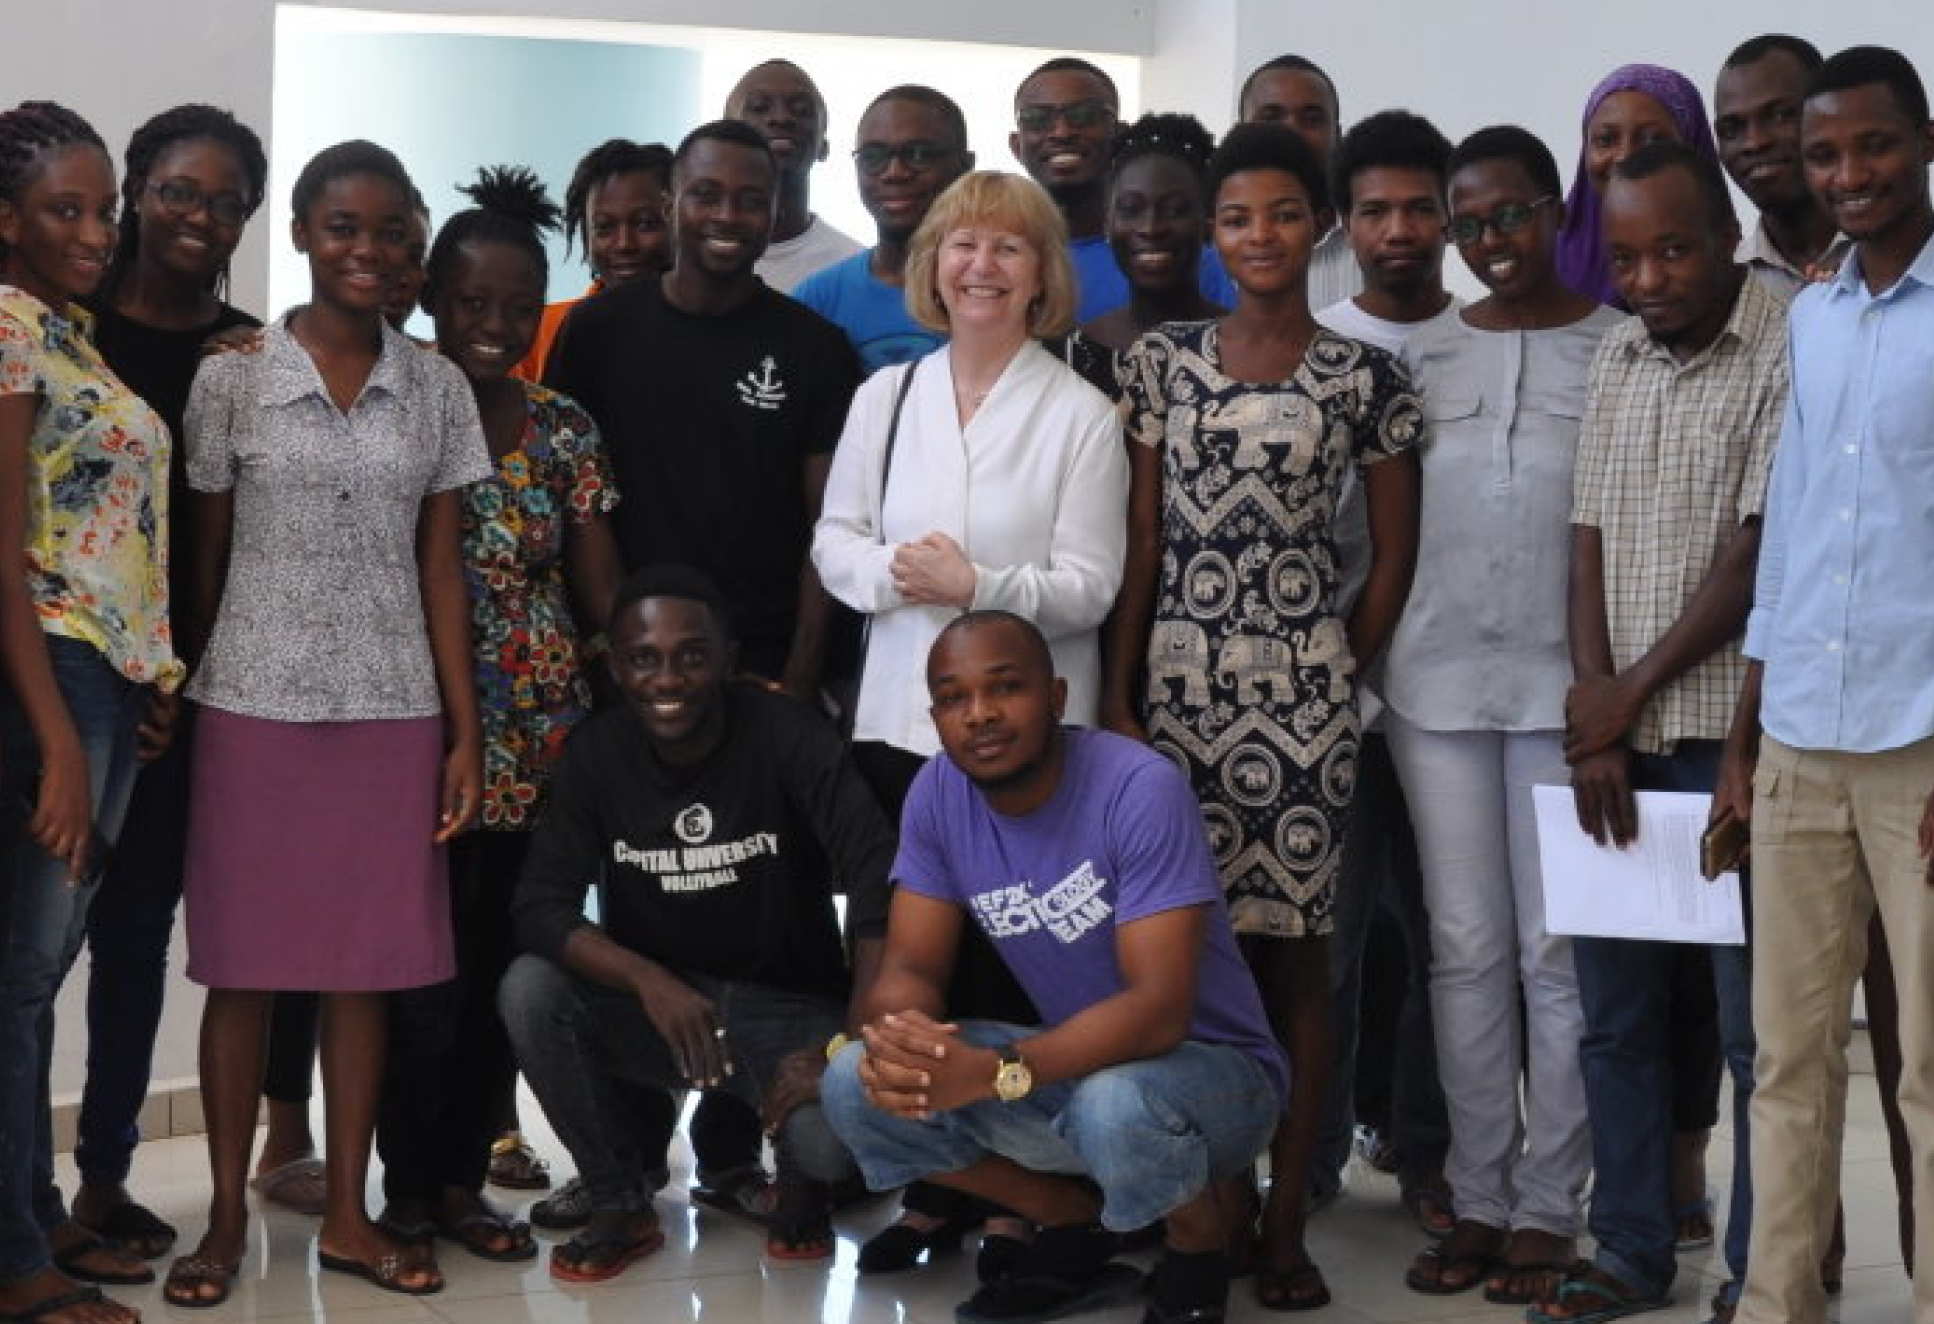 Professor Dallman visited the African Institute of Mathematical Sciences in Ghana